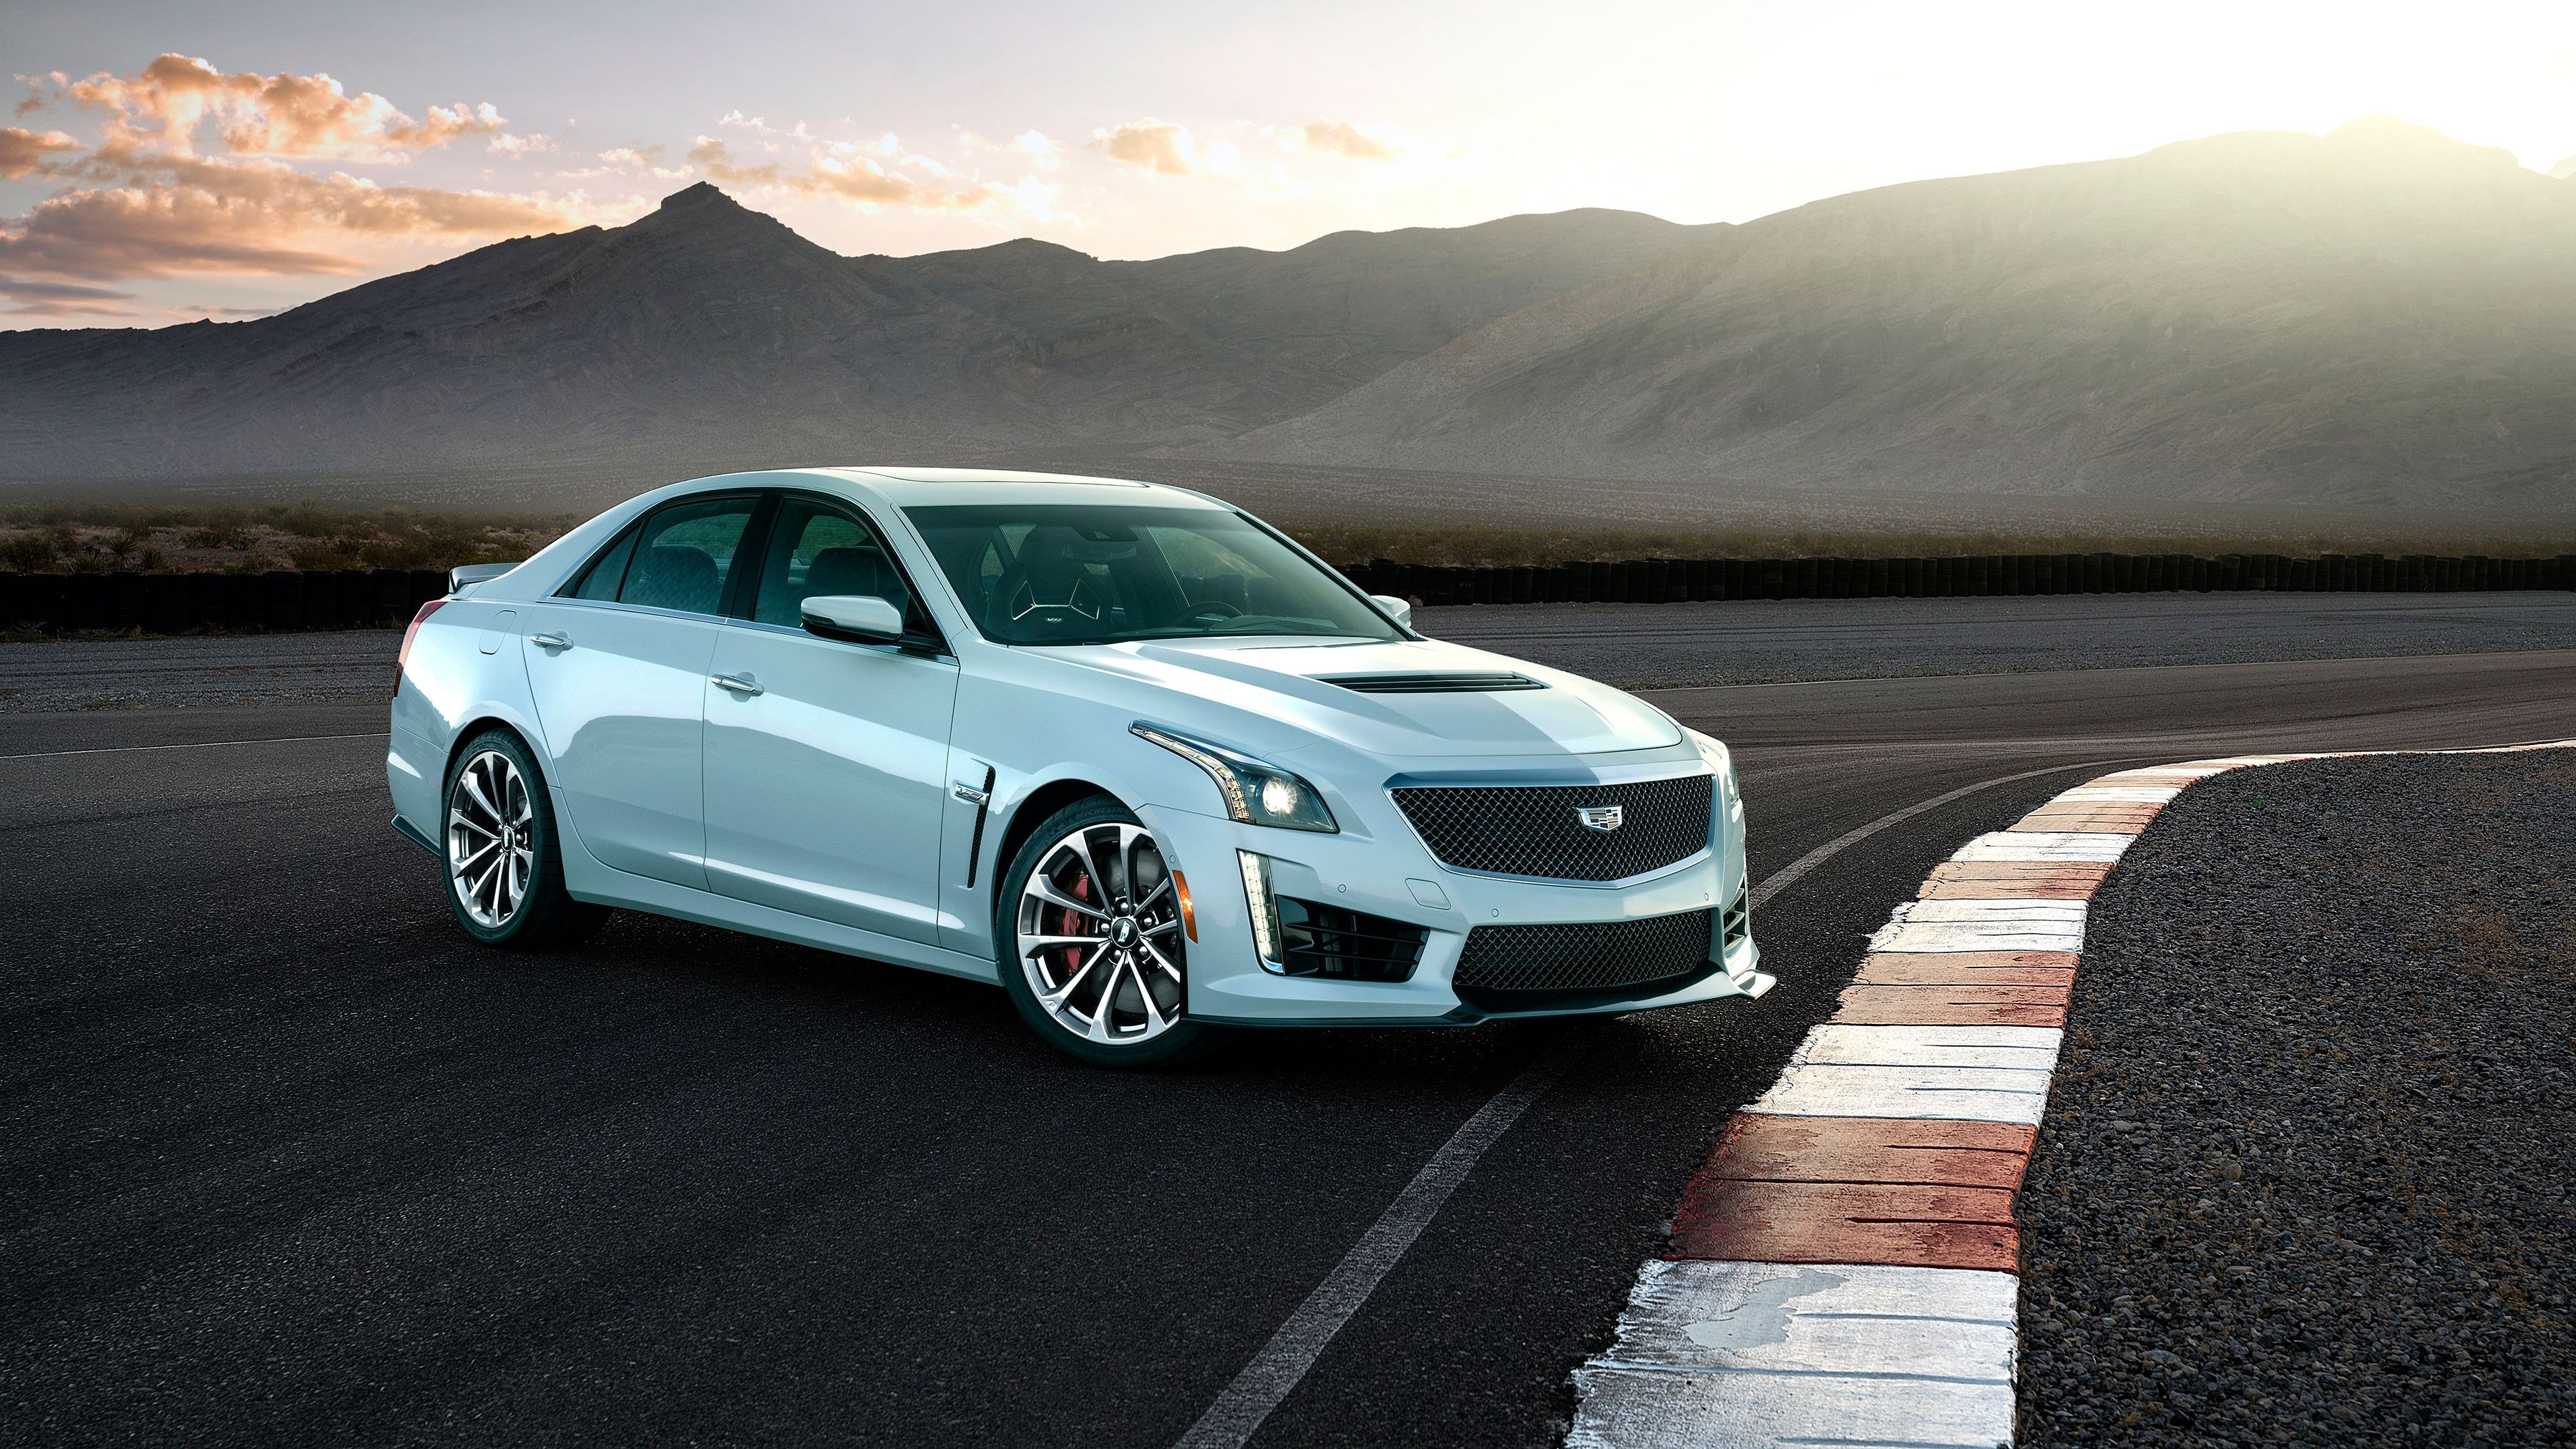 Cadillac CTS, Elegant styling, Sophisticated interior, High-performance engineering, 3600x2030 HD Desktop